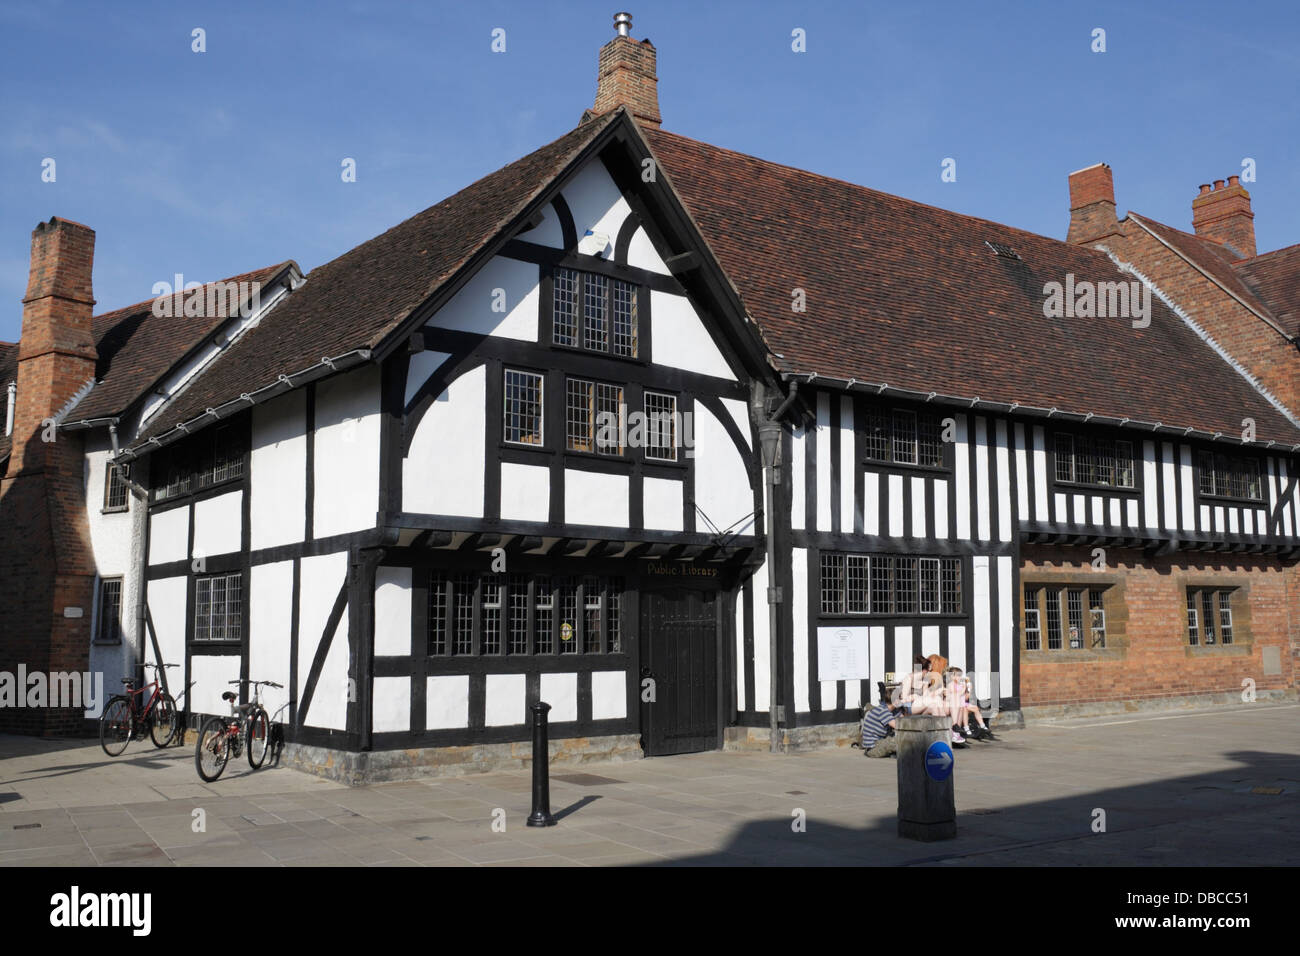 The historic library Stratford Upon Avon England Grade II 2 listed building. English town Stock Photo